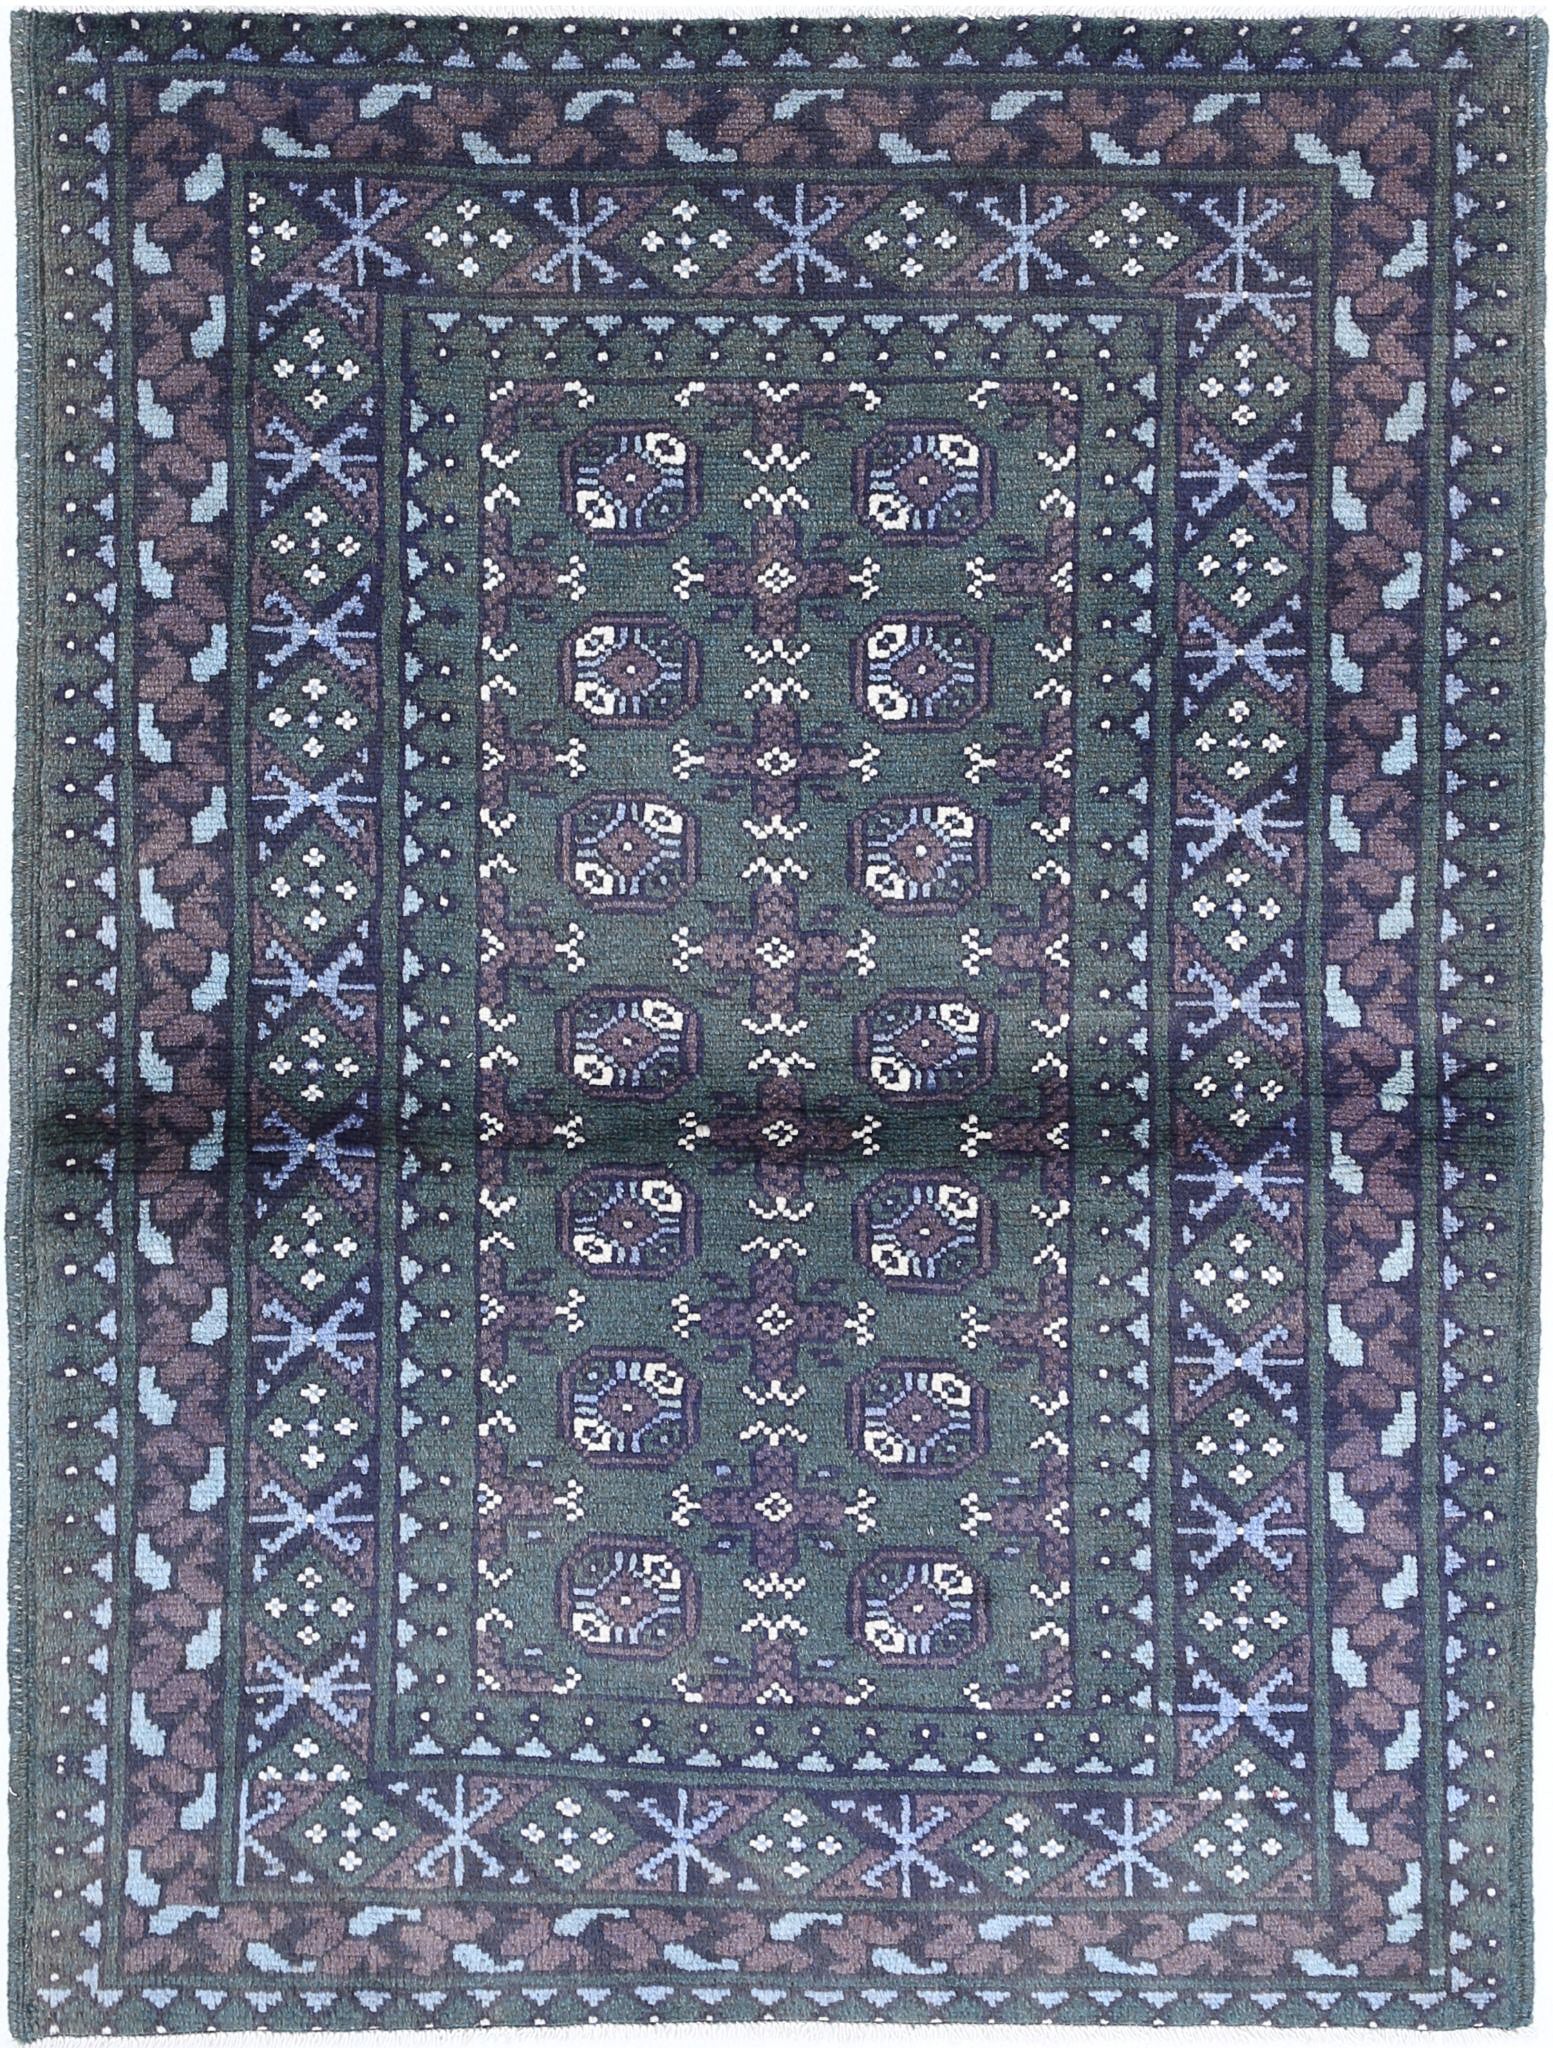 Revival-hand-knotted-gul-collection-wool-rug-5013908.jpg